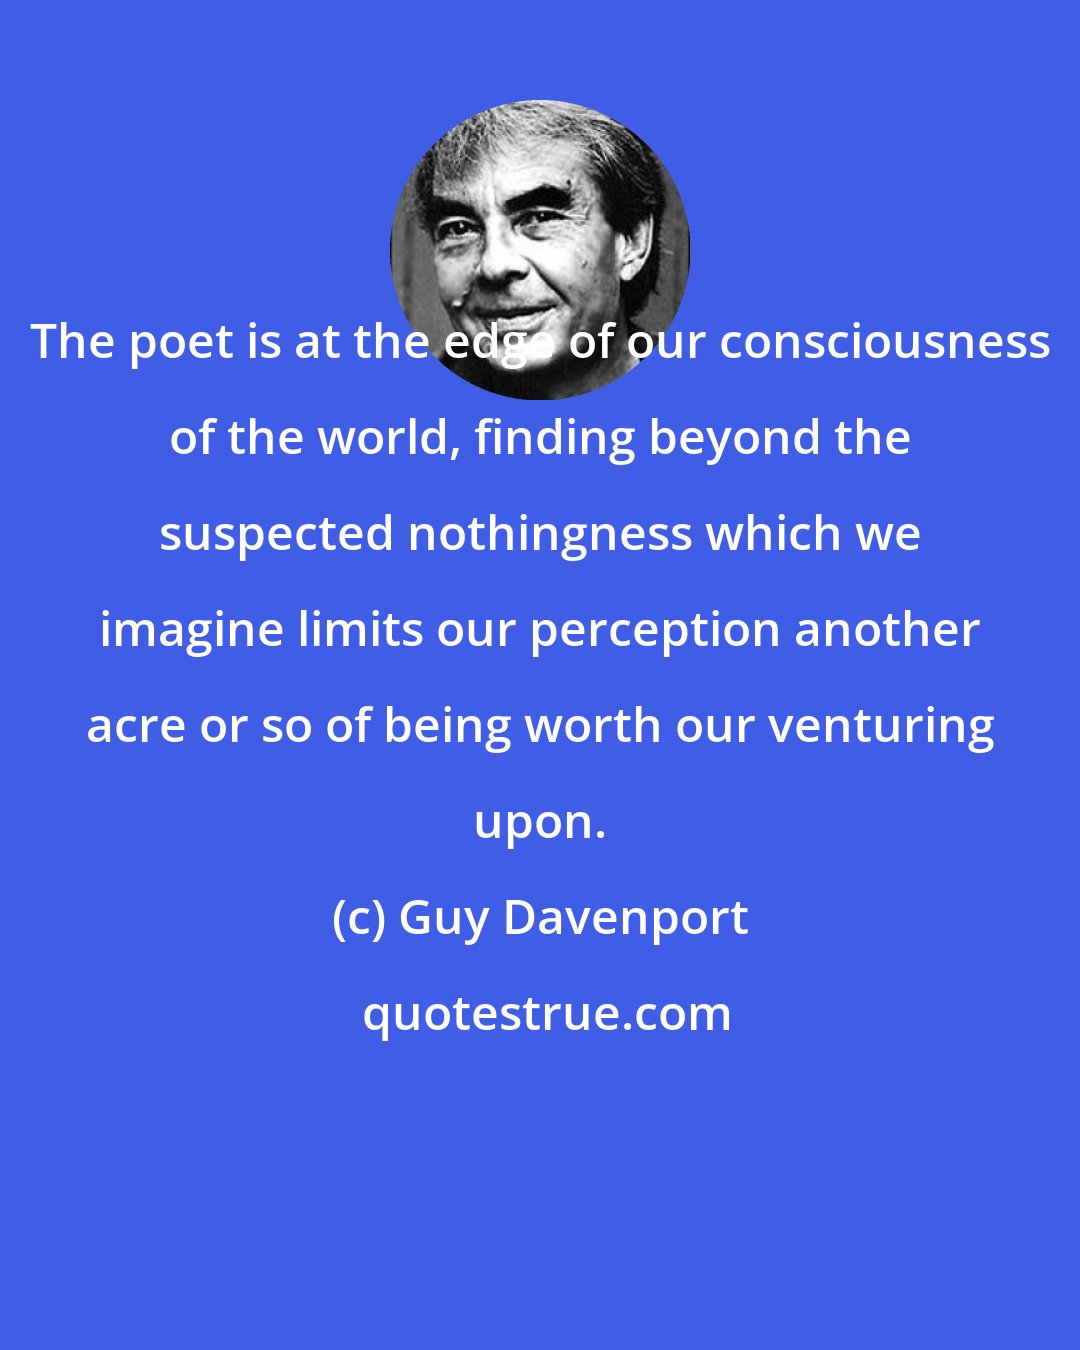 Guy Davenport: The poet is at the edge of our consciousness of the world, finding beyond the suspected nothingness which we imagine limits our perception another acre or so of being worth our venturing upon.